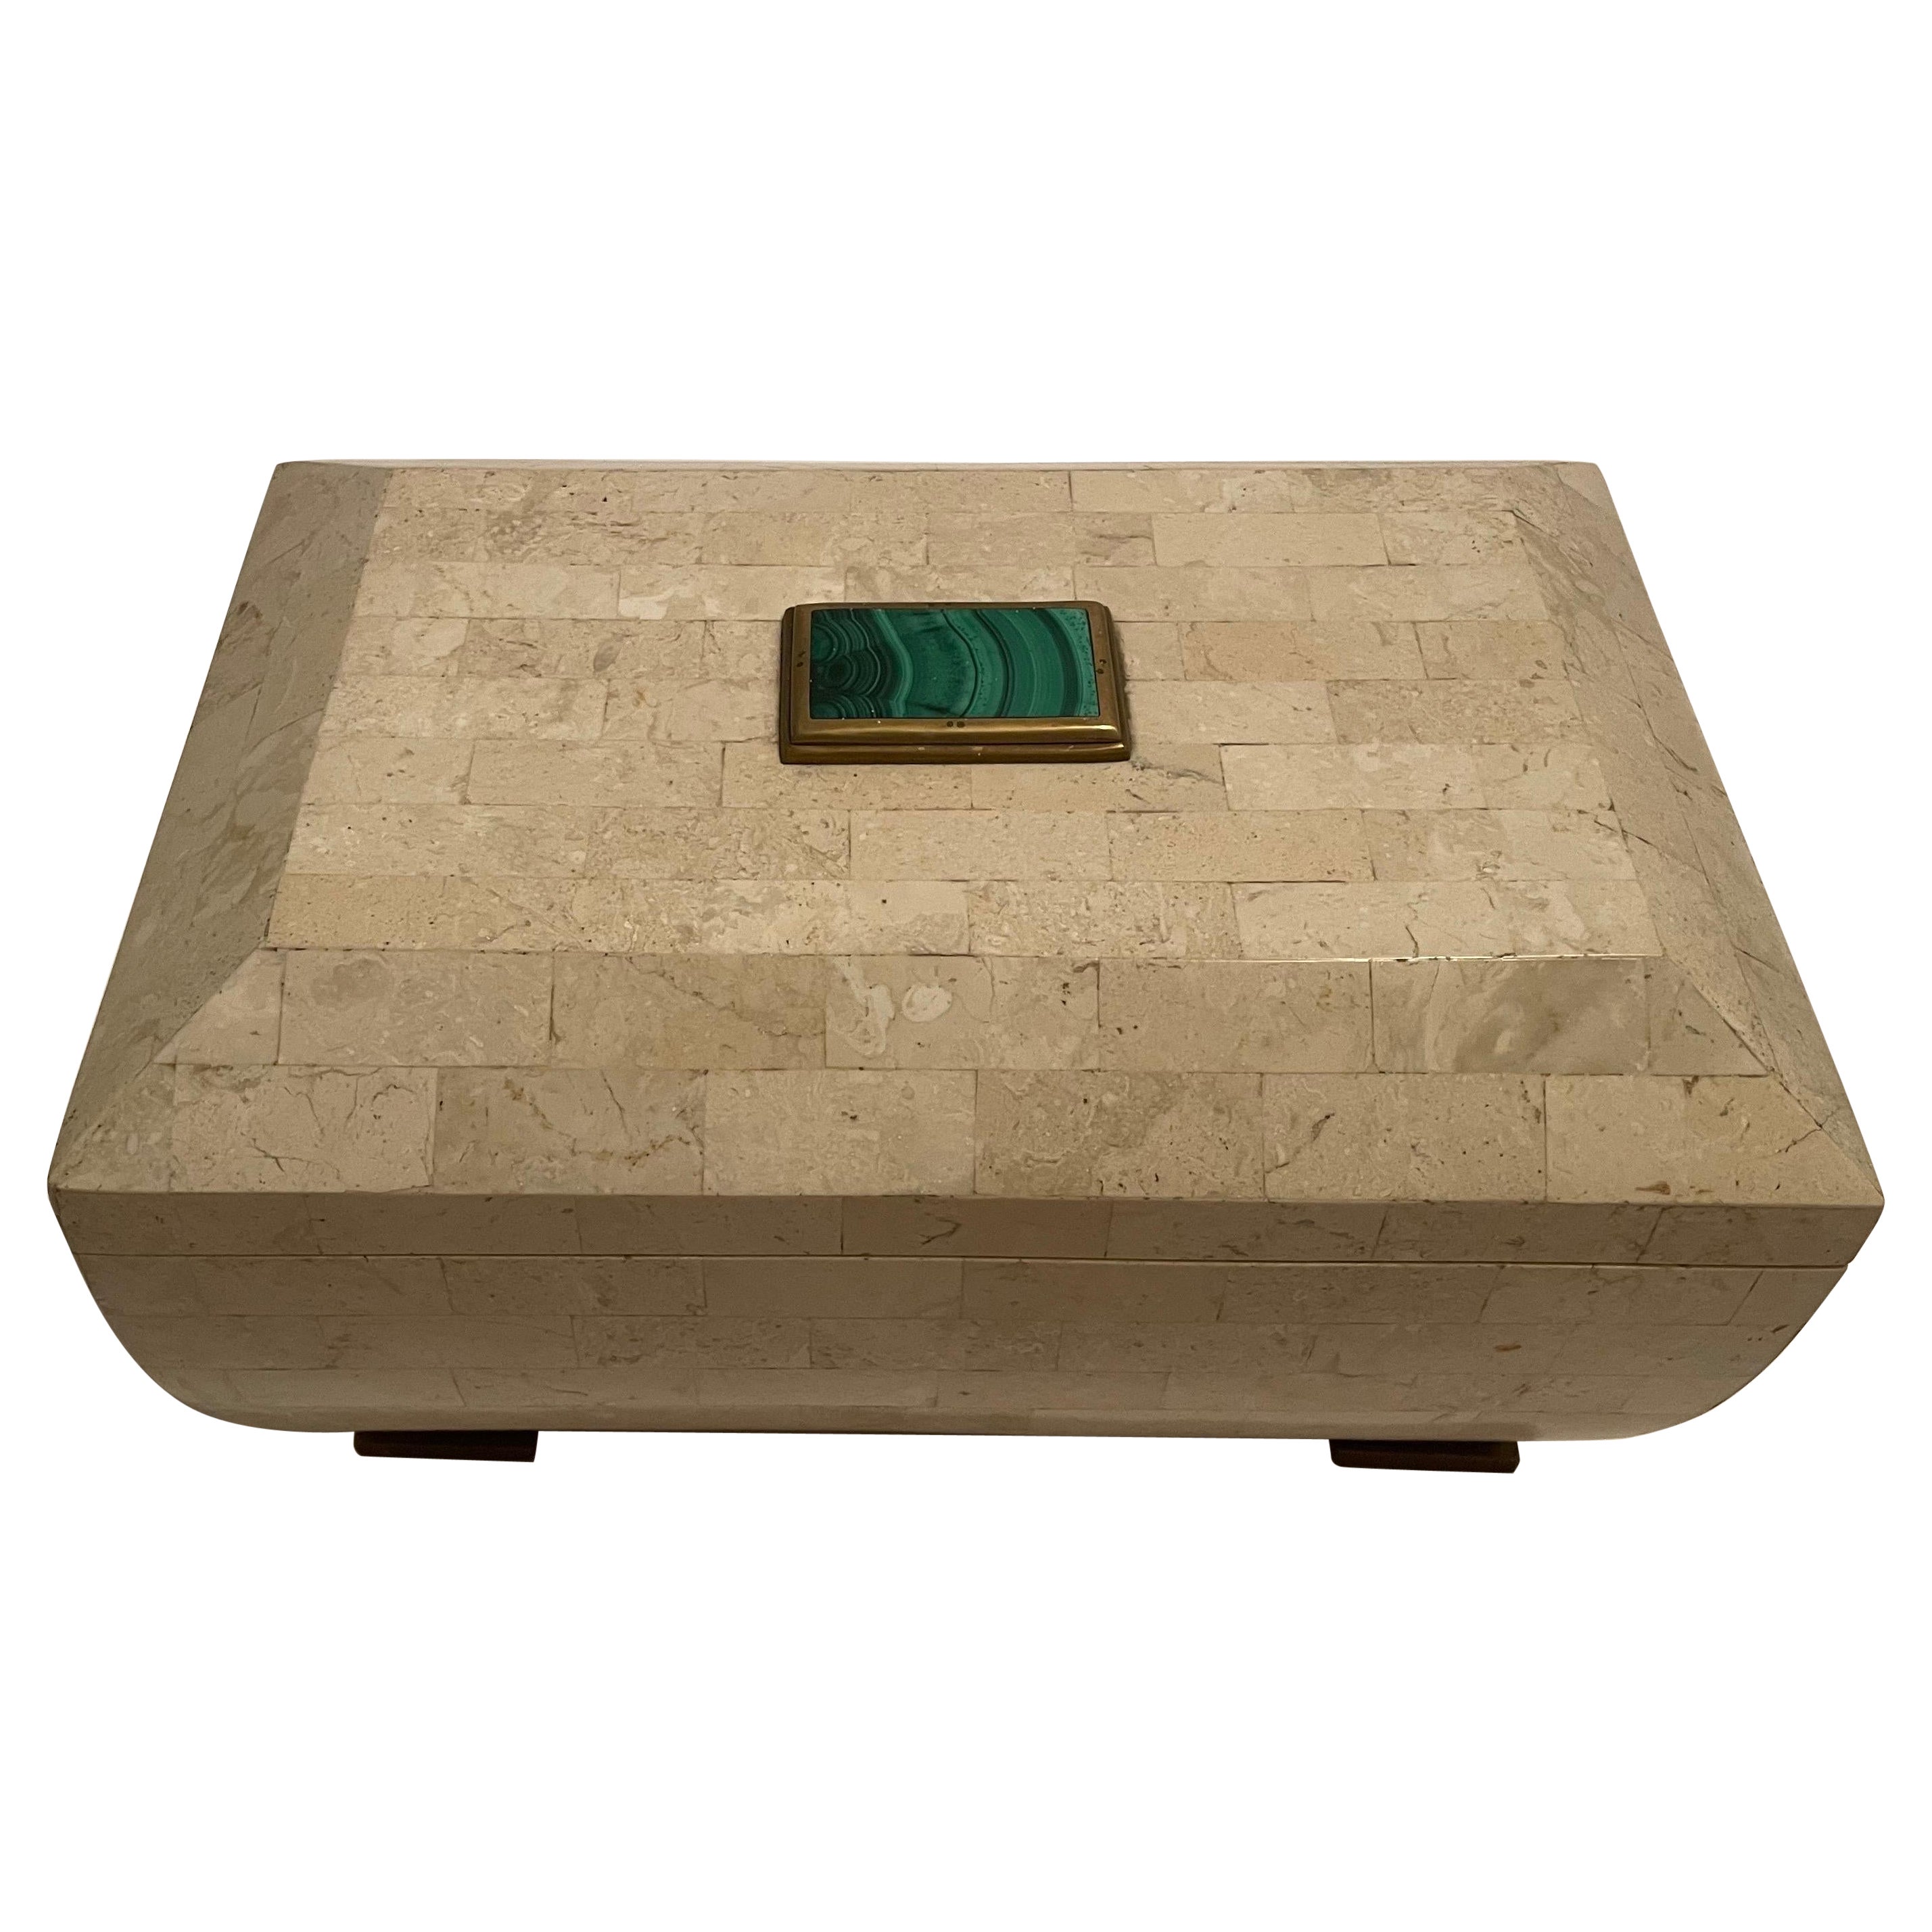 Maitland Smith tessellated stone box with green malachite stone on top  For Sale